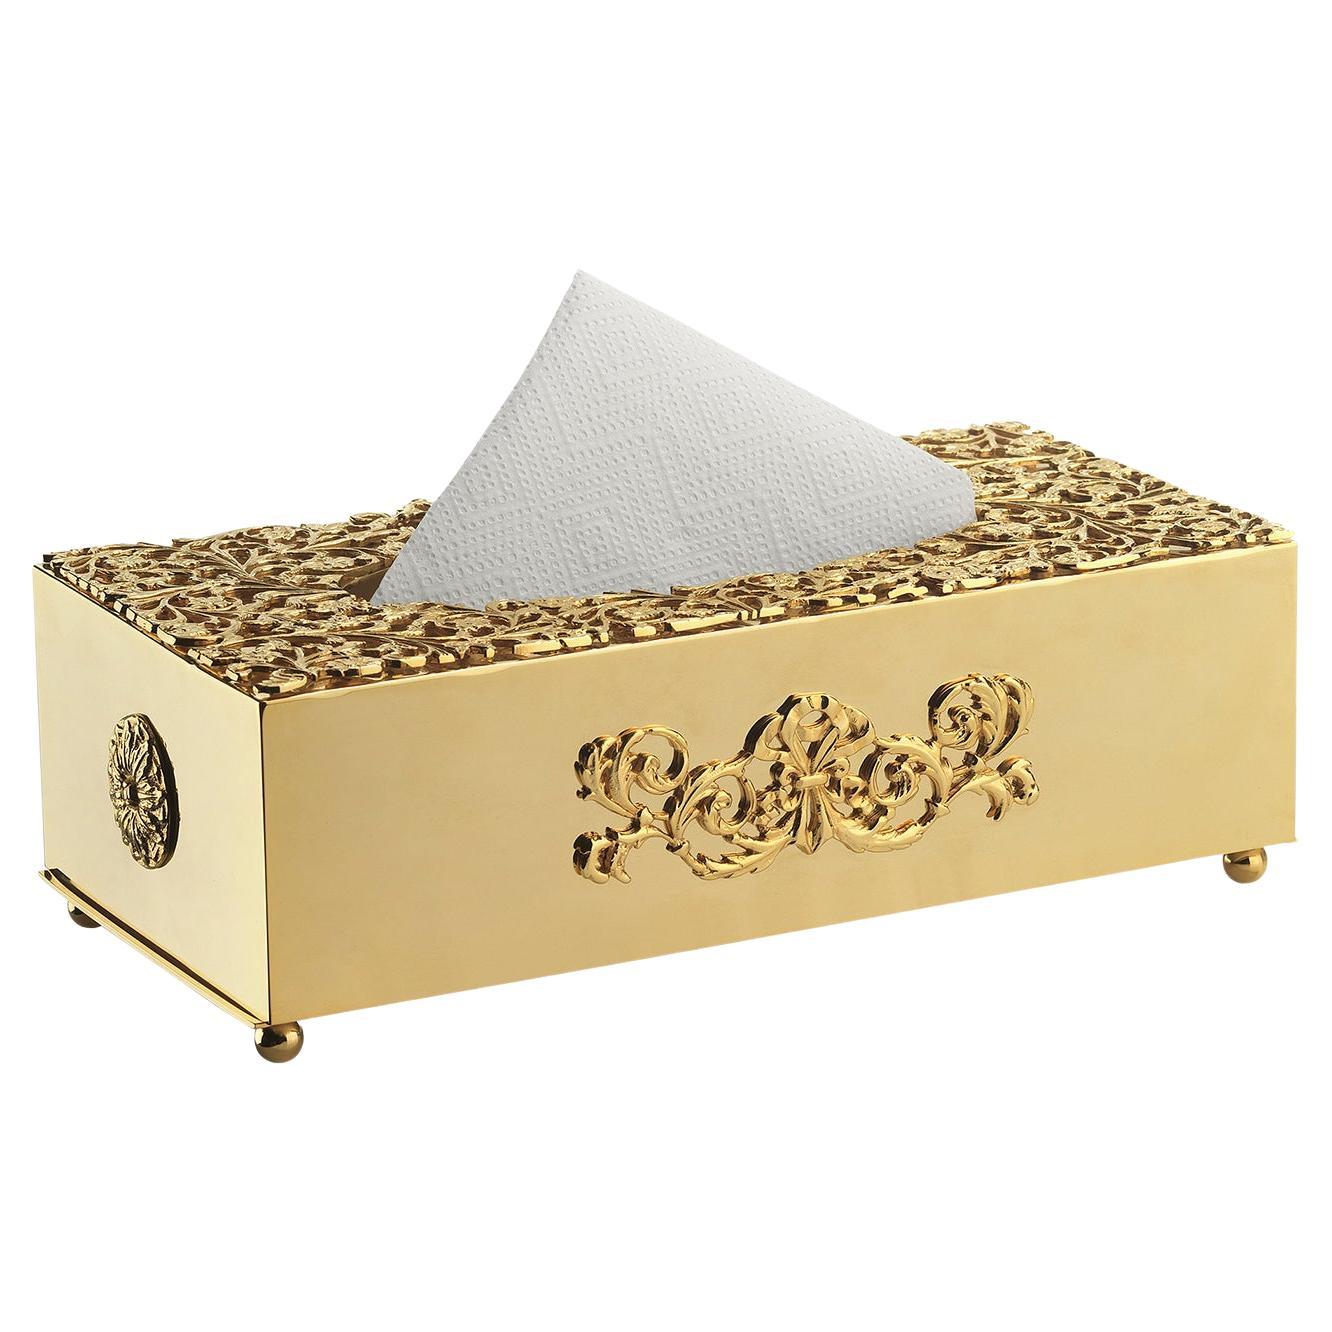 Golden Footed Tissue Box With Classic Ornaments For Sale